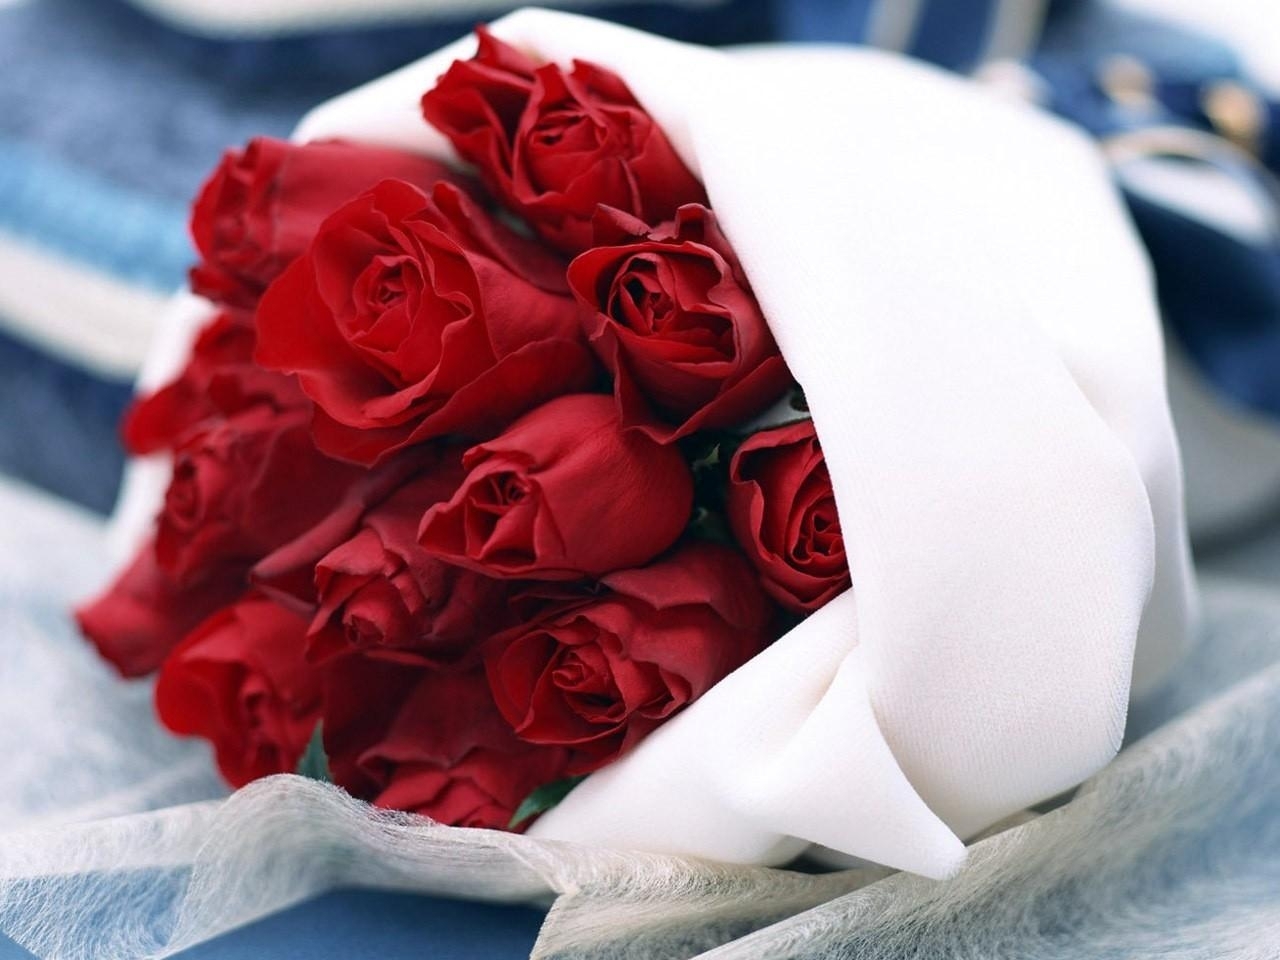 Free HD roses, bouquets, plants, flowers, red